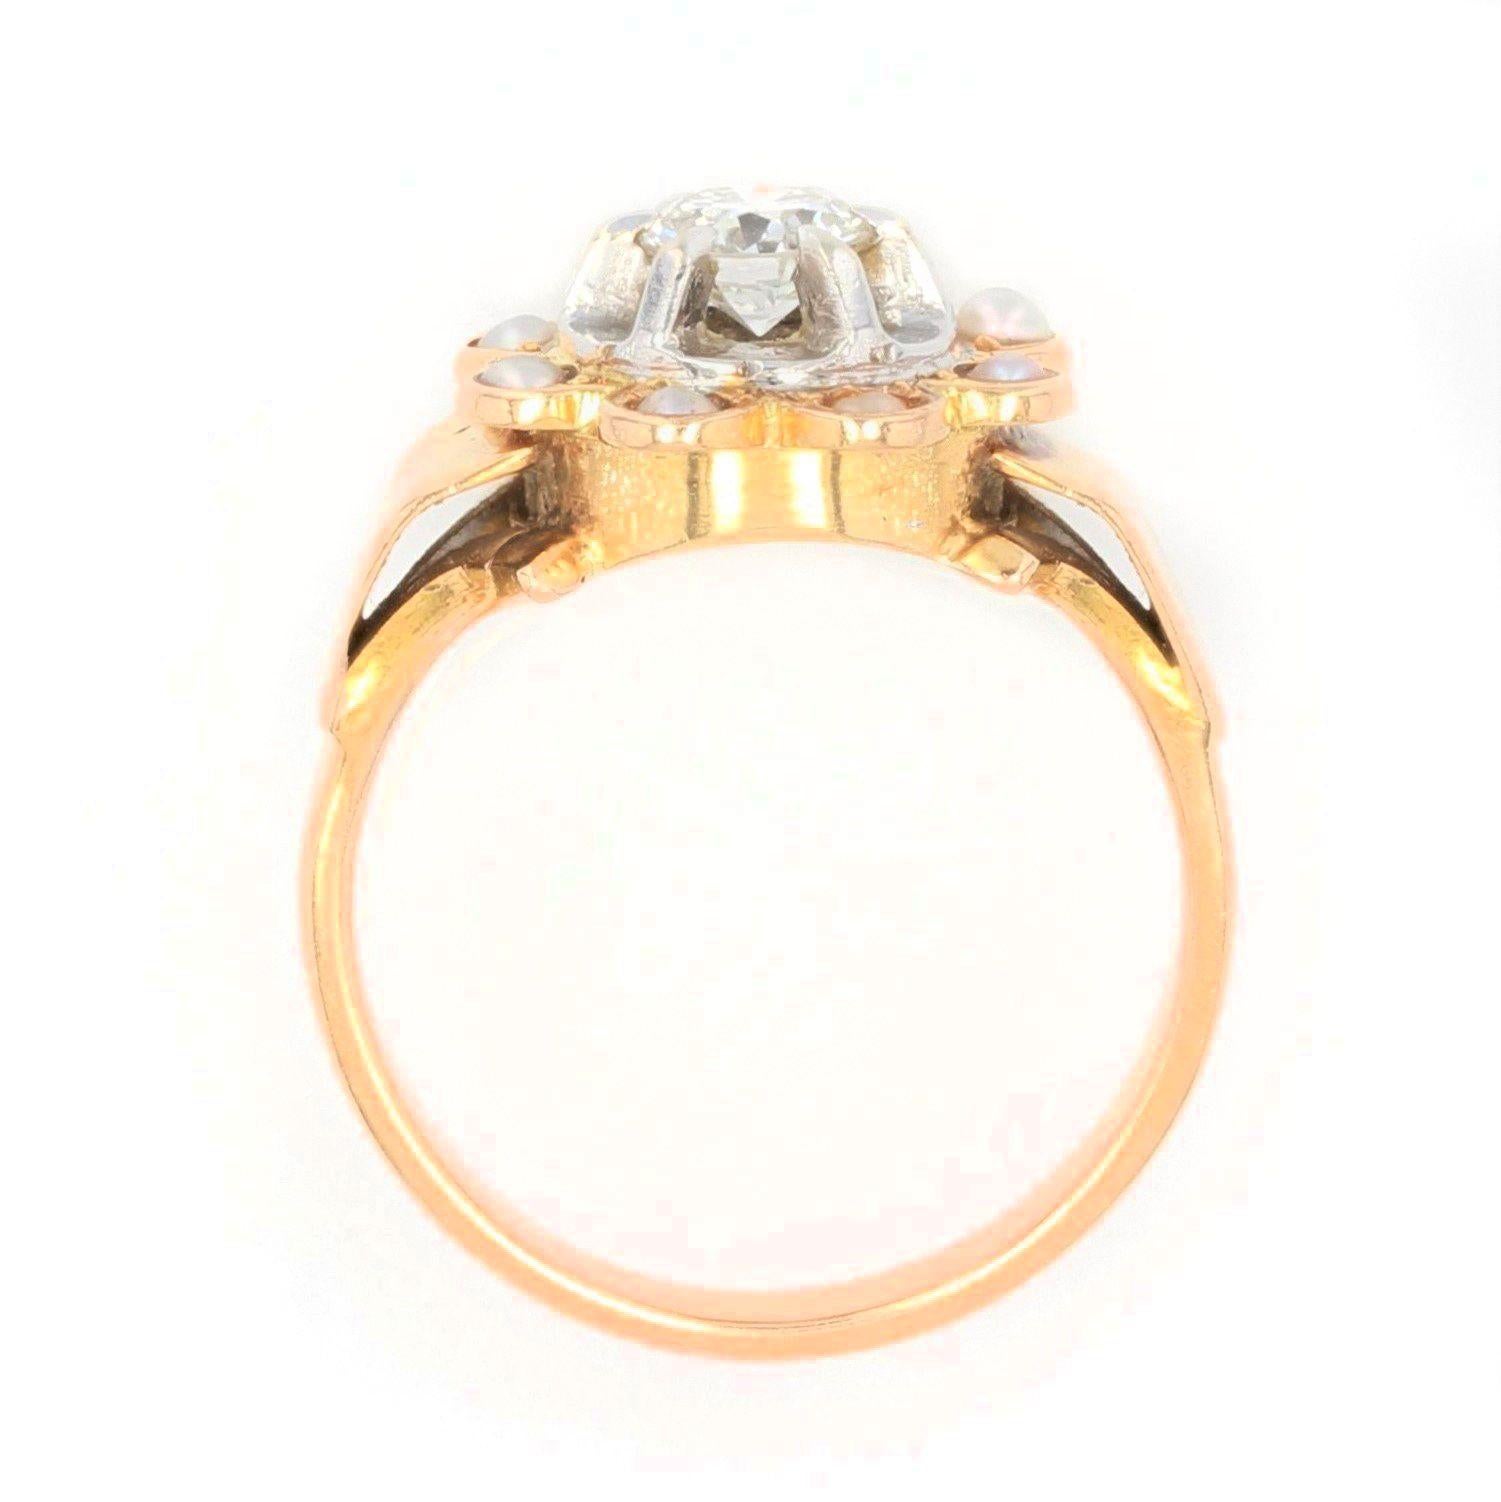 1960s Diamond Surrounded by Cultured Pearls 18 Karat Rose Gold Ring For Sale 4